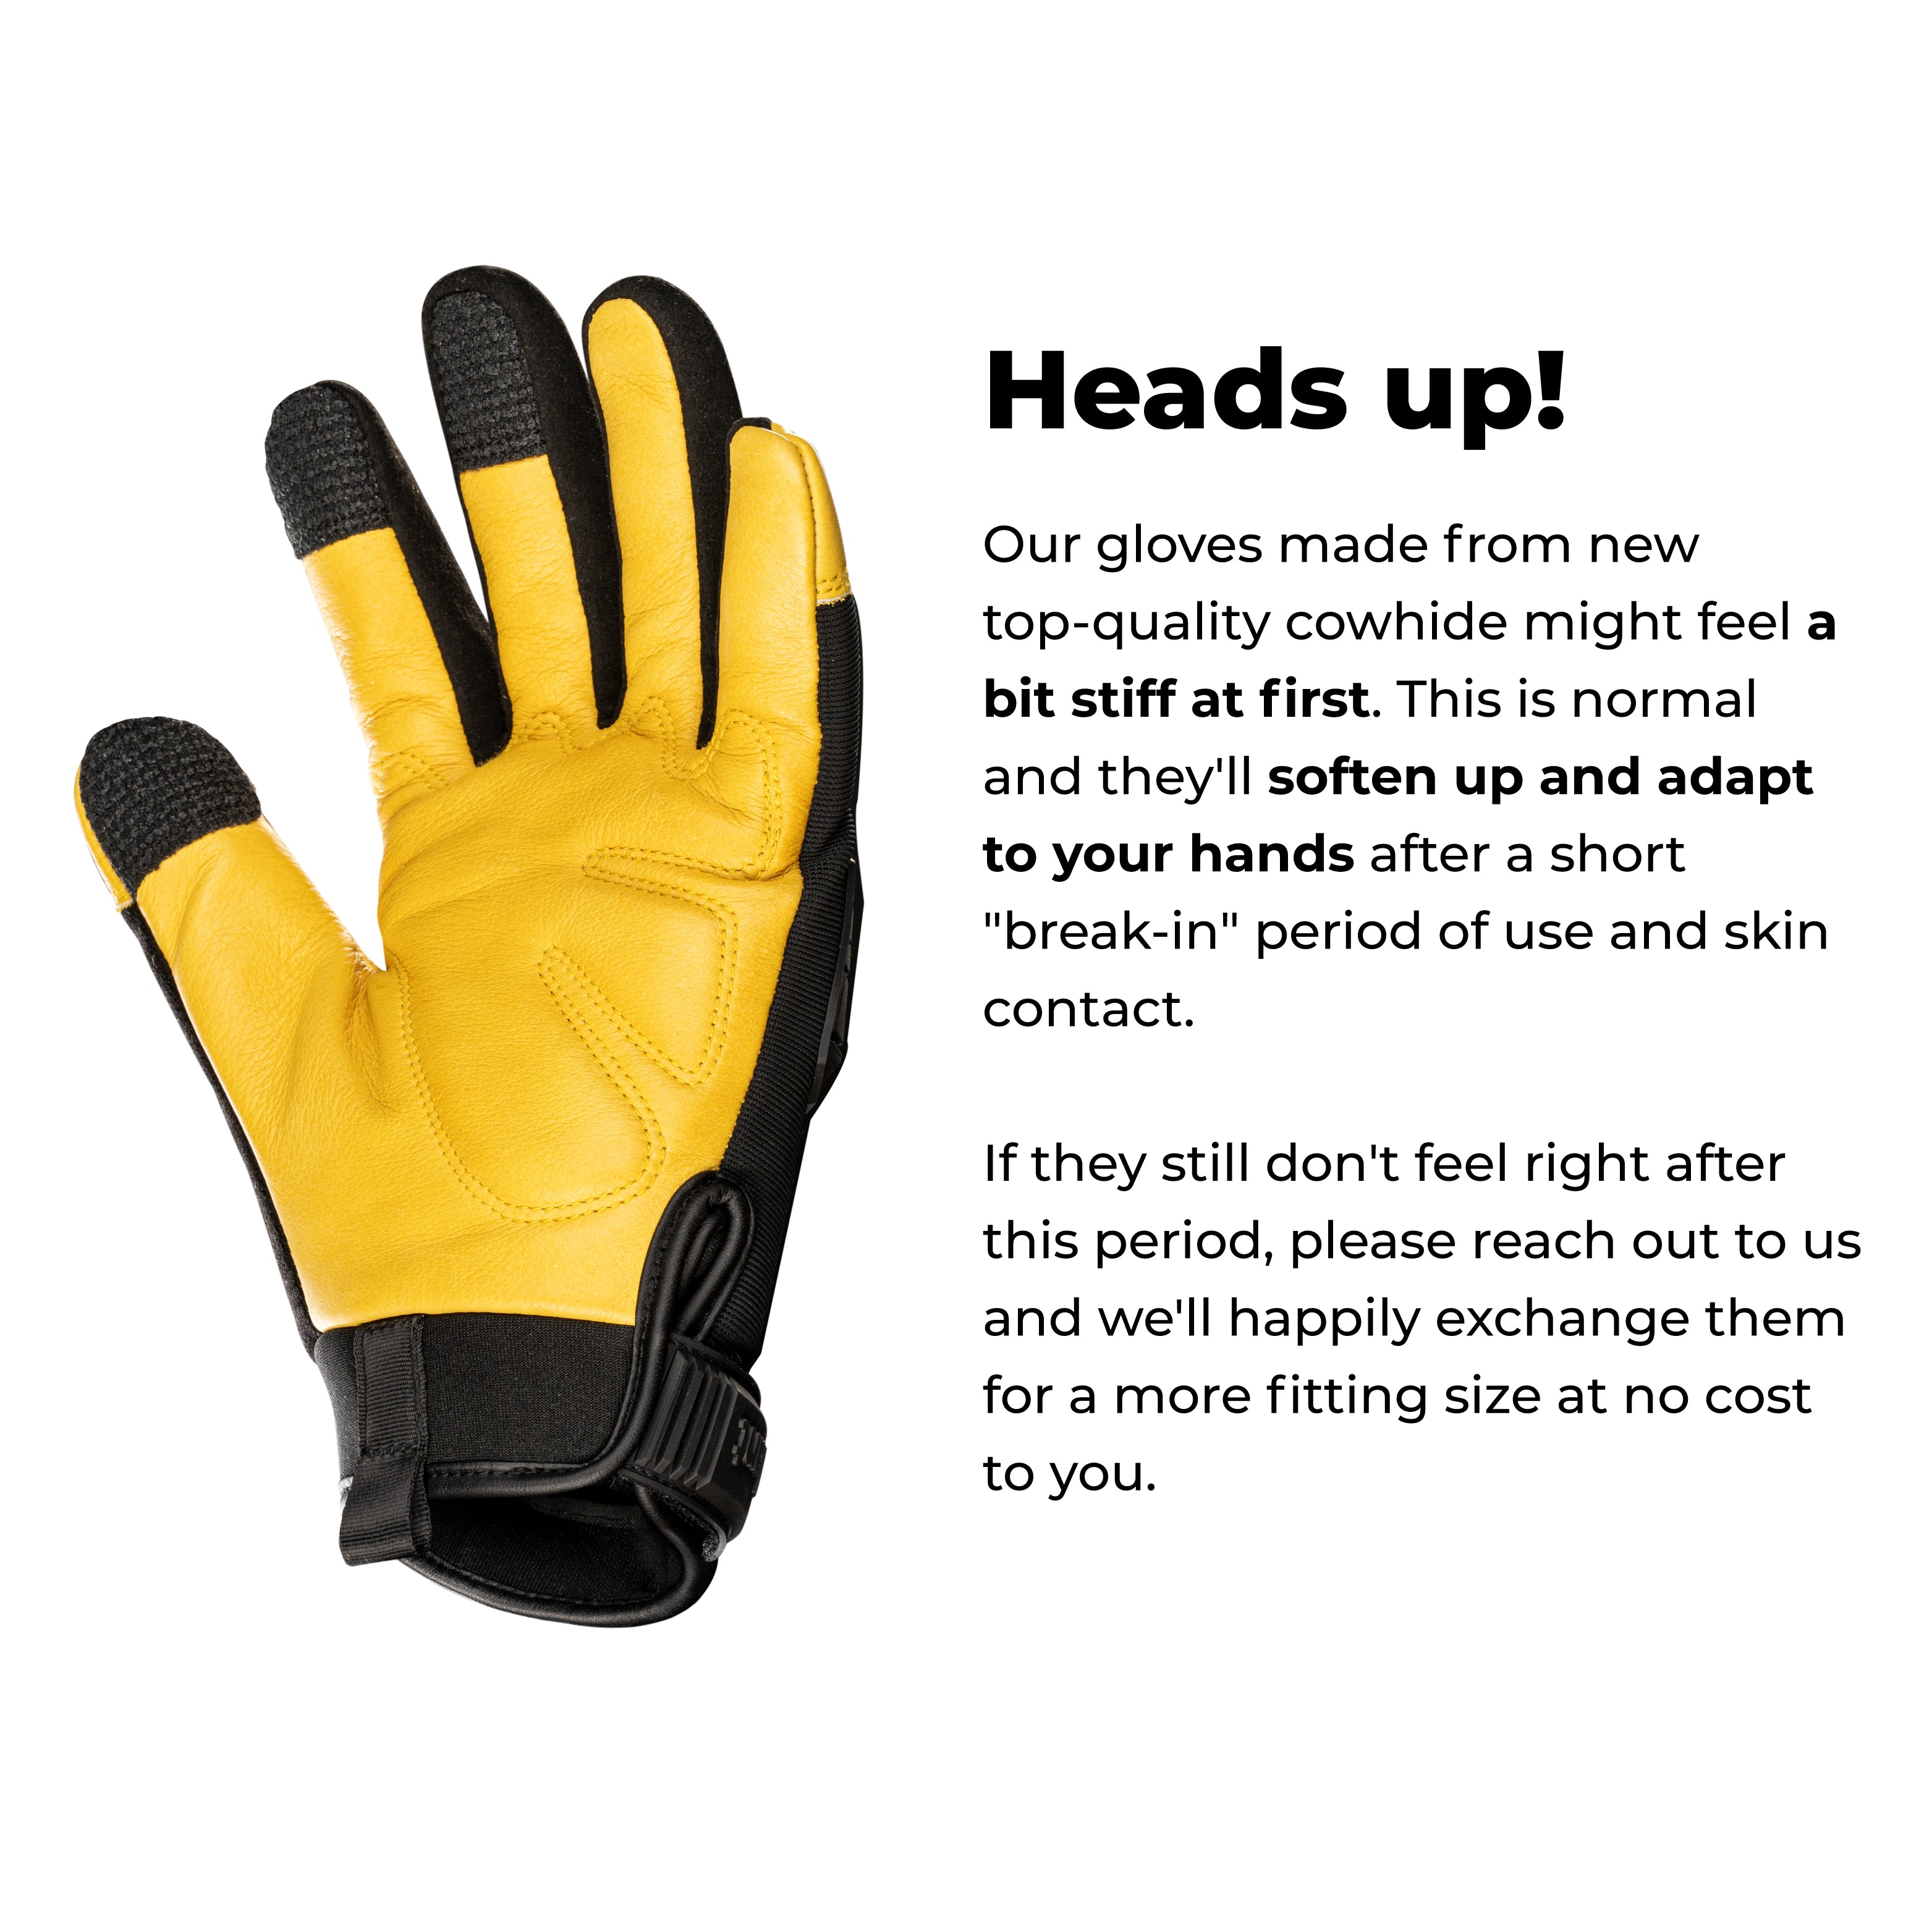 Thor Pro Mechanic Gloves Heavy Duty, with Impact Protection and Vibration Absorption, Snug Fit & Durable